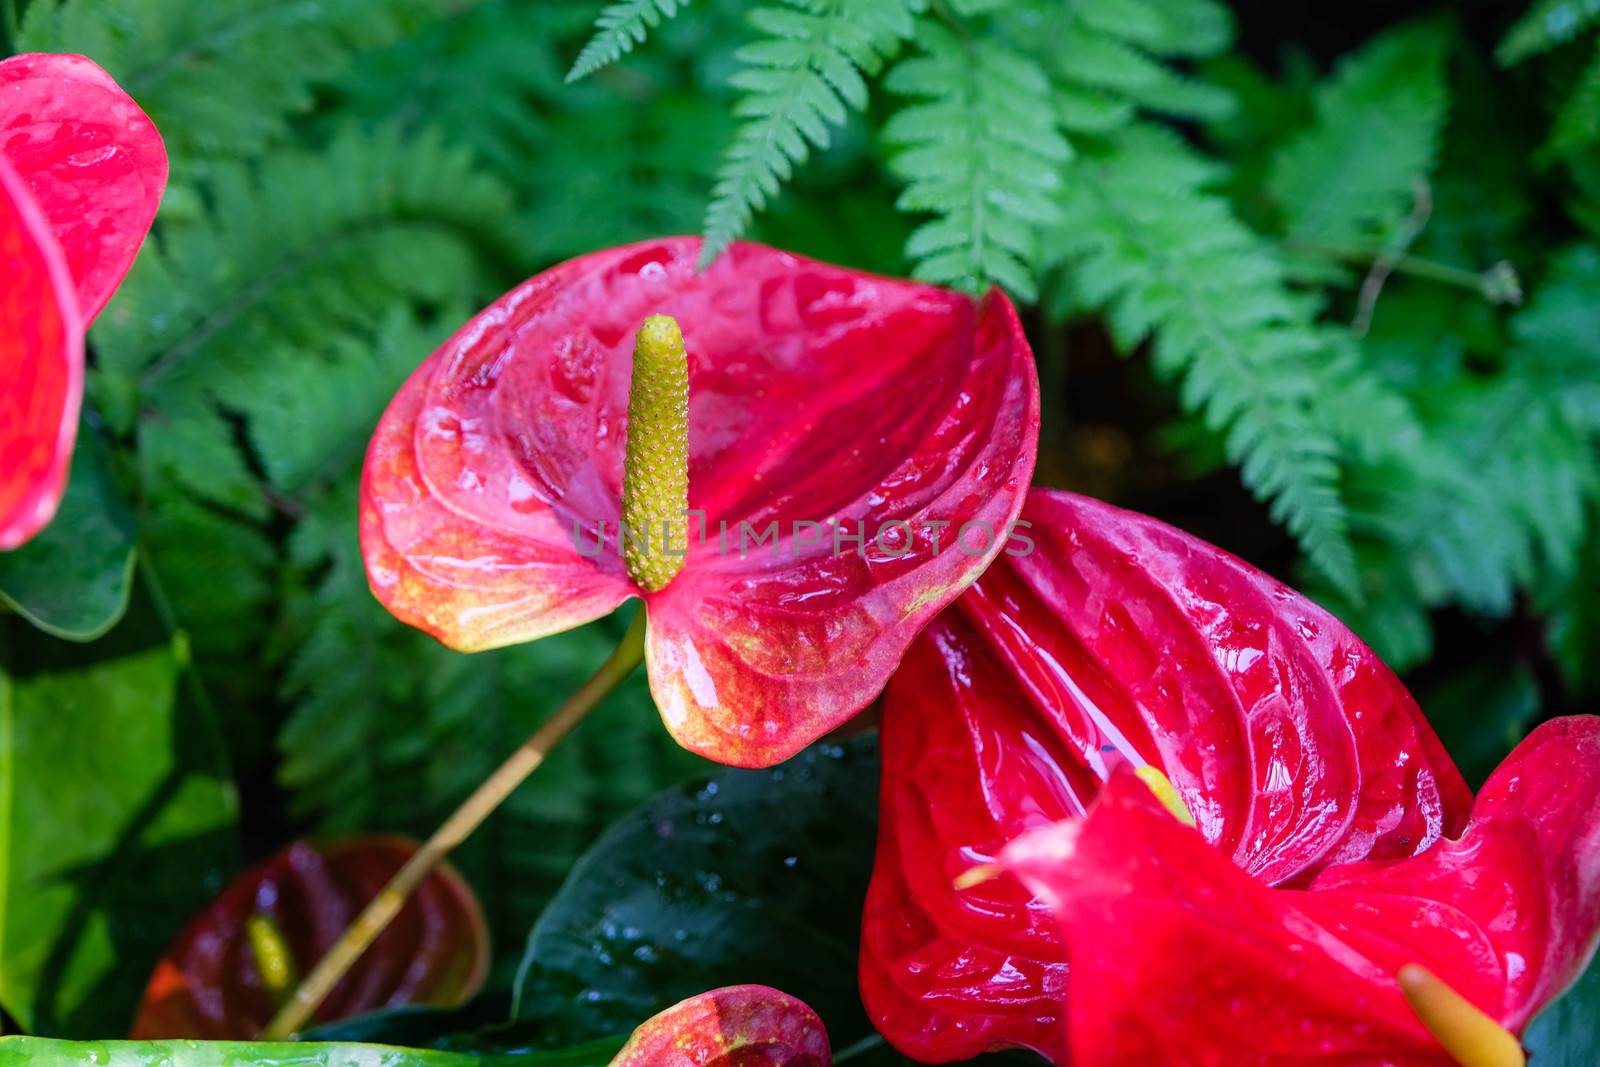 The Anthurium is a red heart-shaped flower. Dark green leaves as a background make the flowers stand out beautifully. Anthuriums have come to symbolize hospitality.